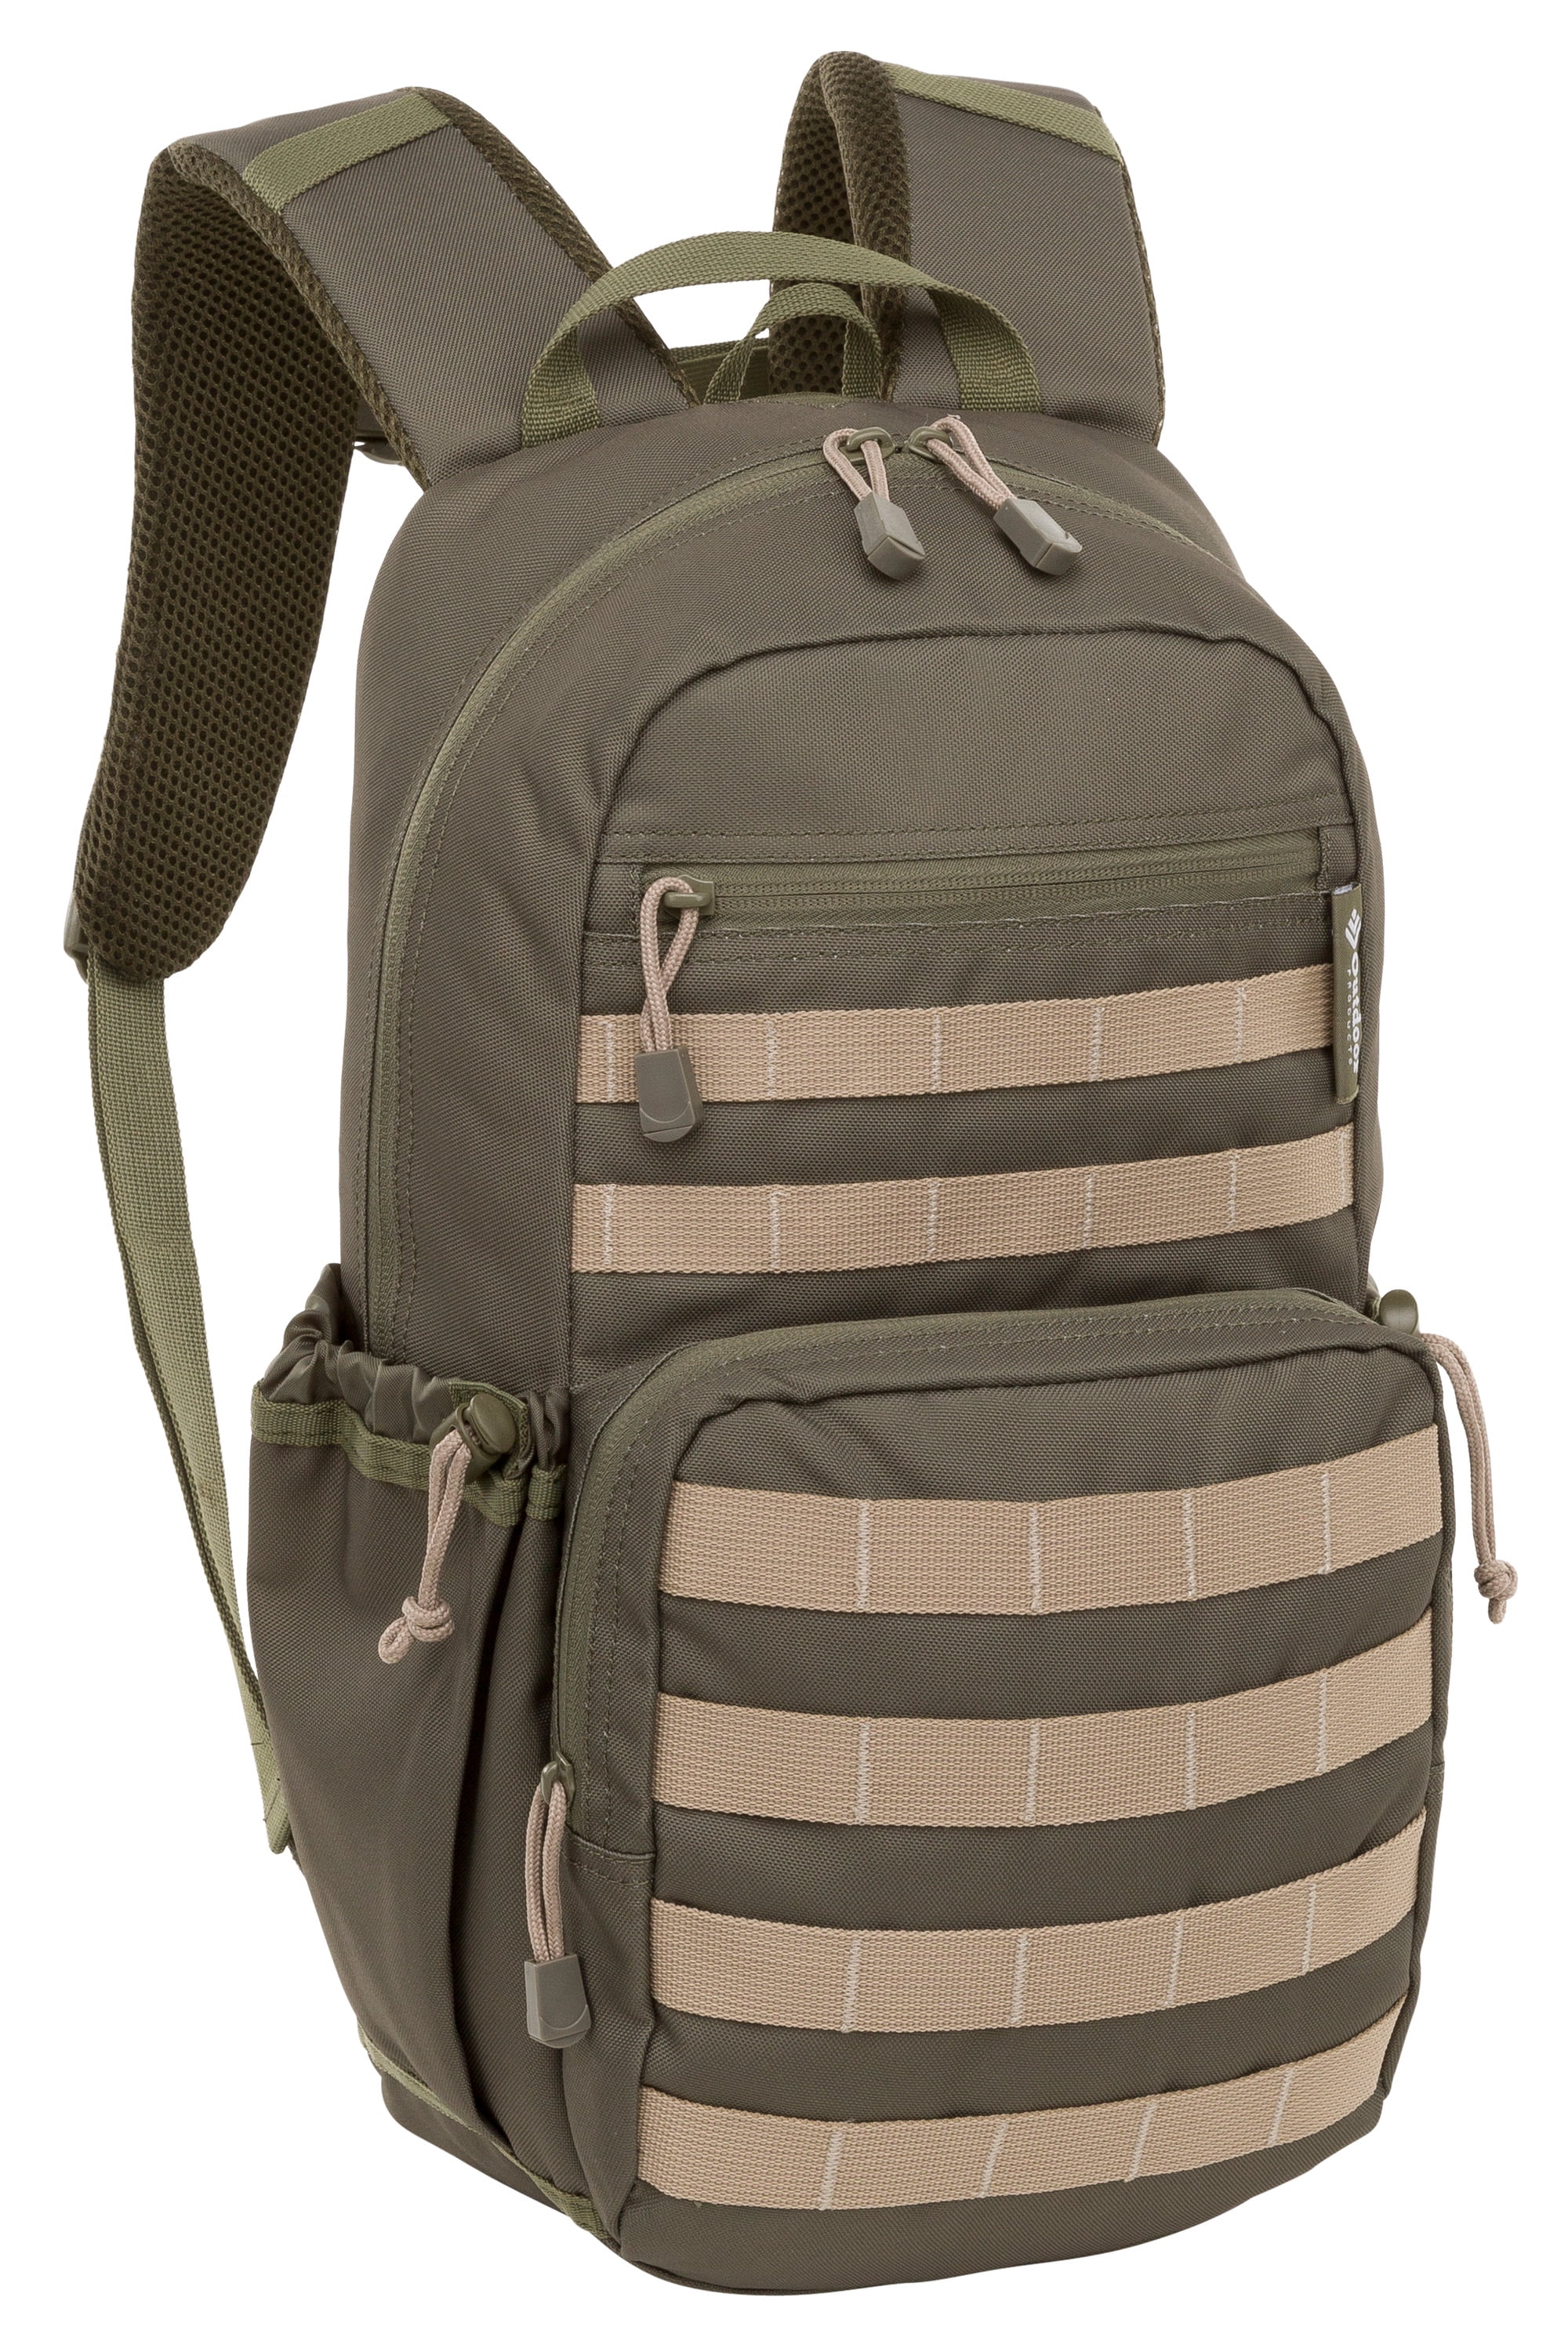 Outdoor Products Venture 17 Ltr Backpack, Green and Brown, Unisex